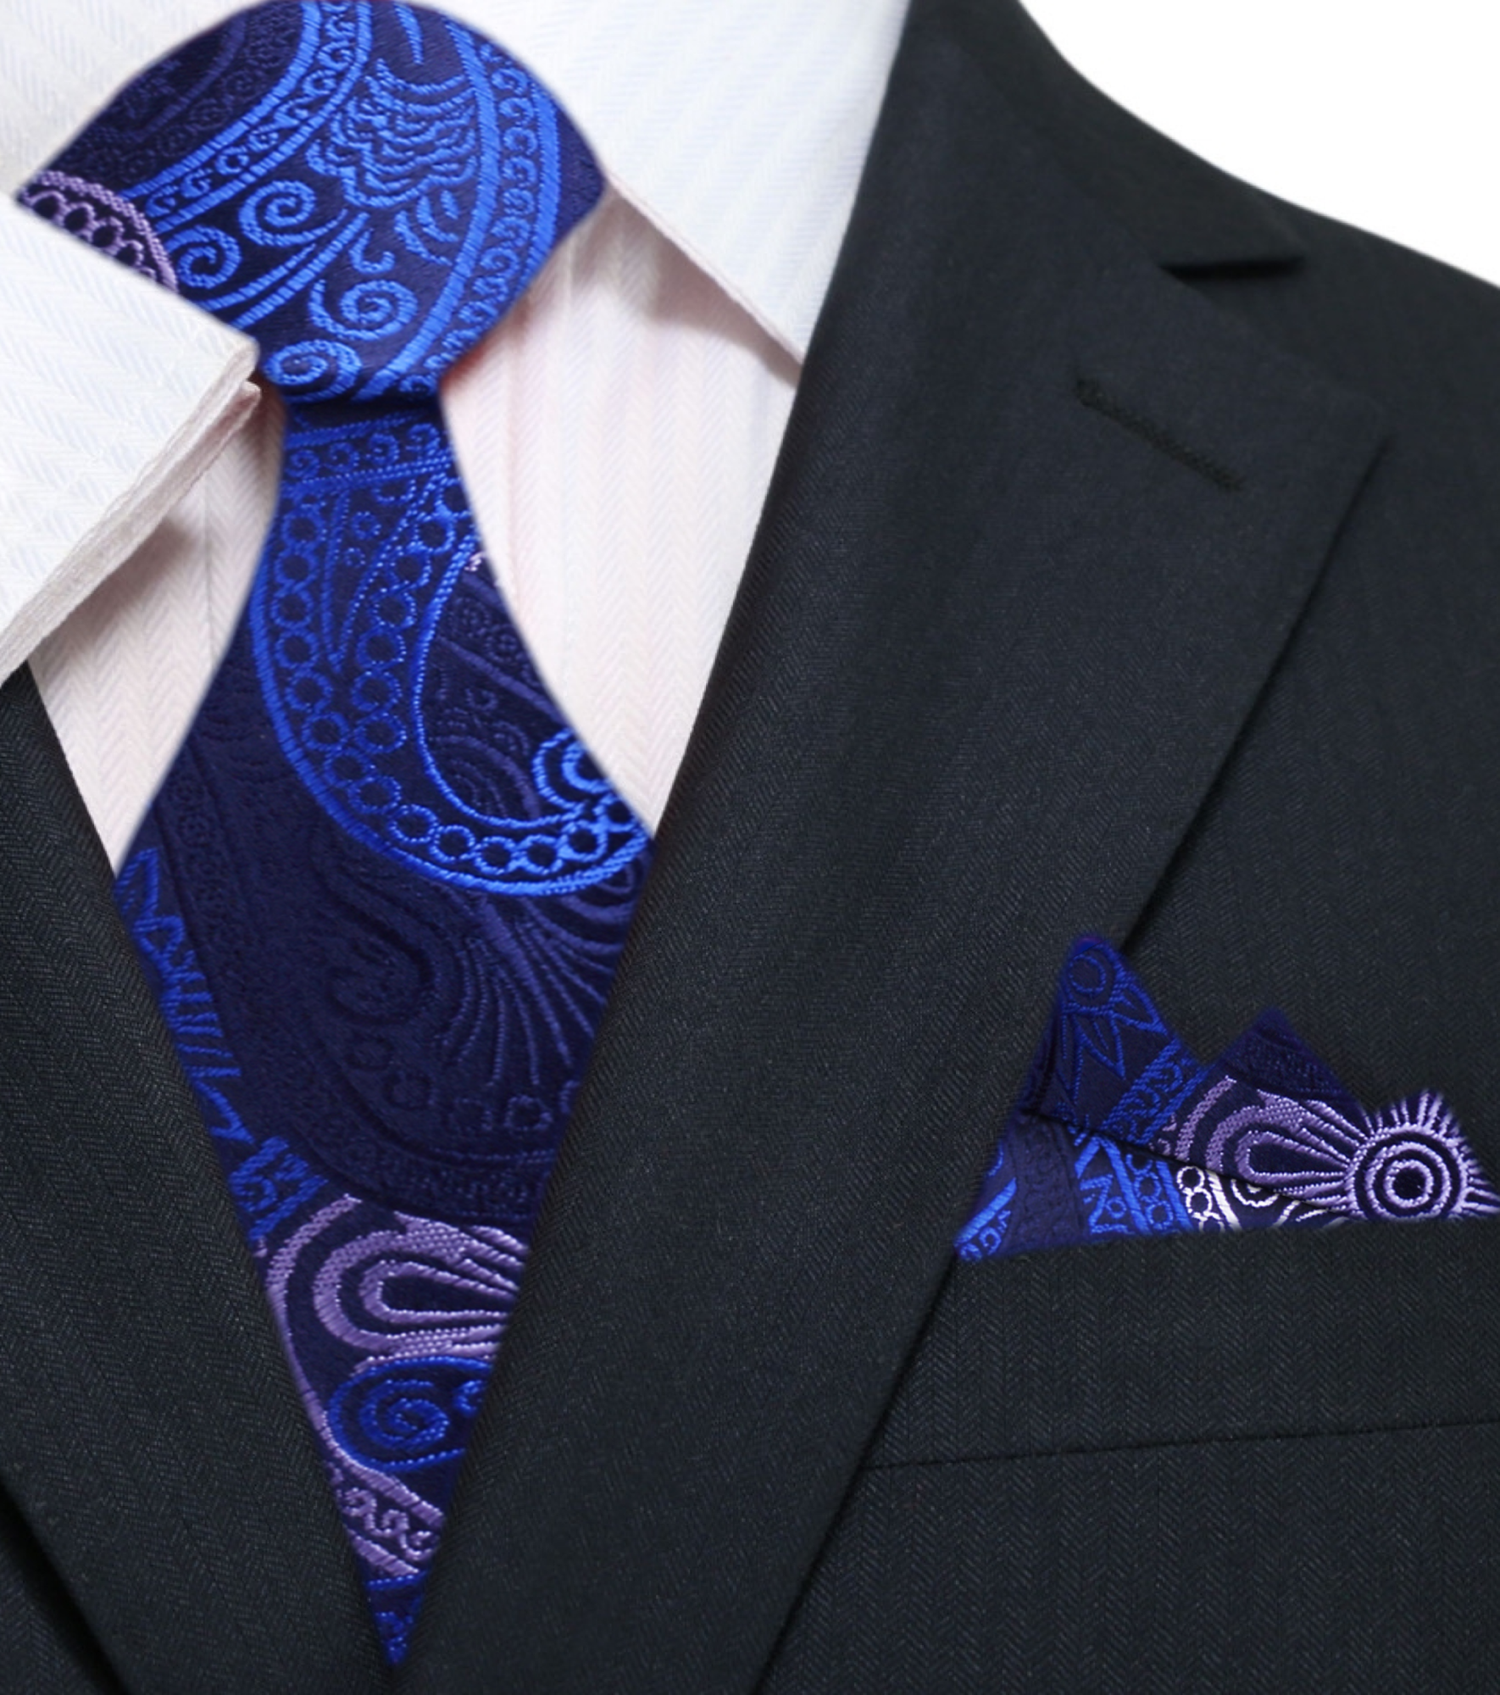 Main: Shades of Blue and White Paisley Necktie and Matching Square